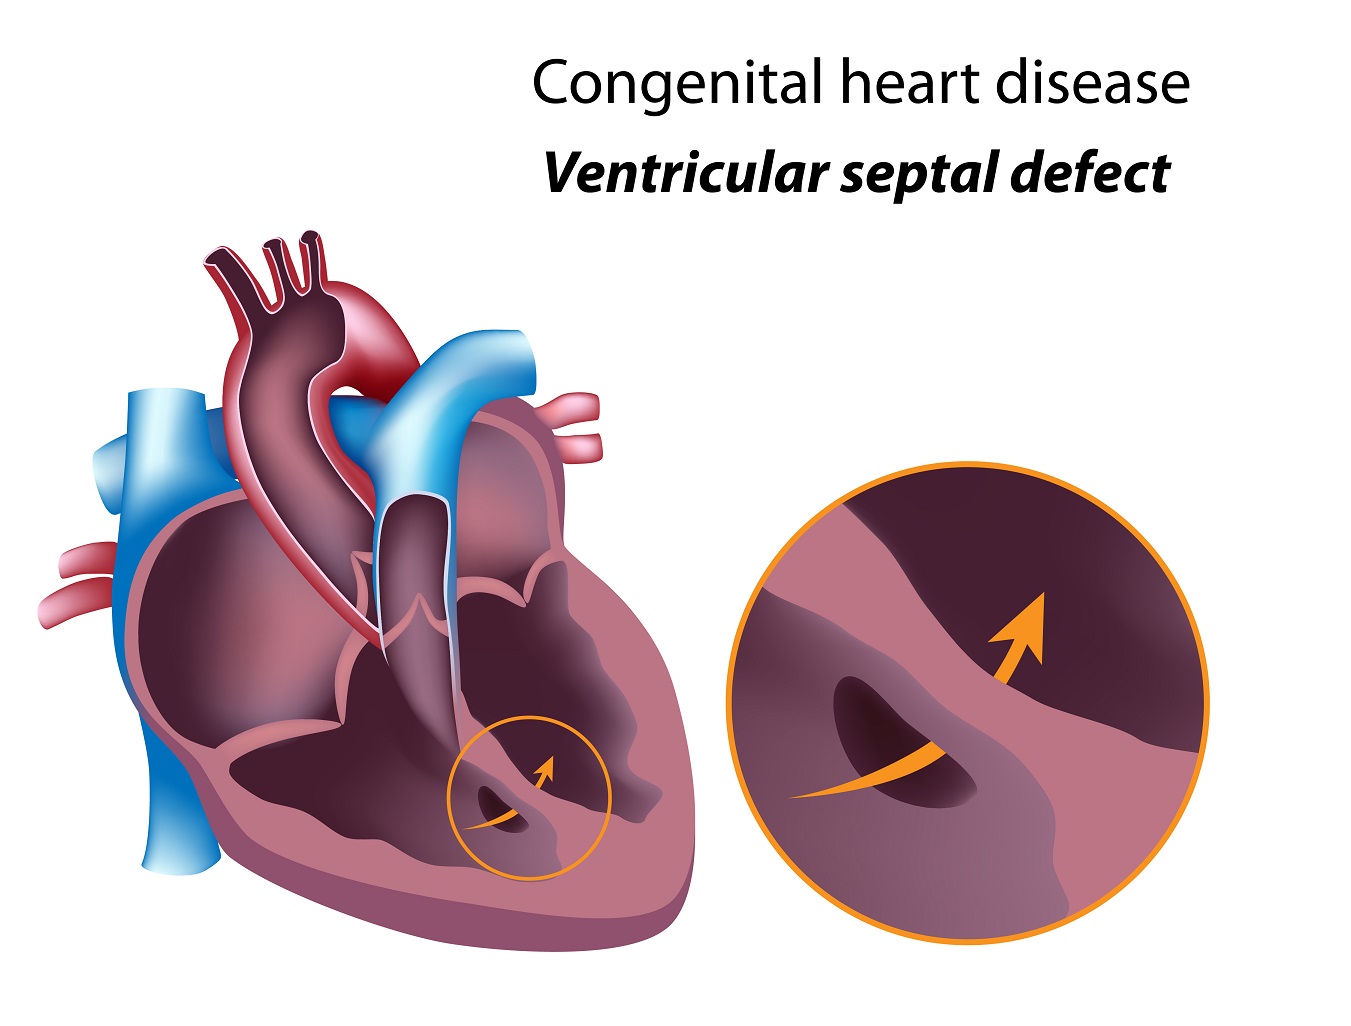 Congenital Heart Defects Explained: Types, Causes, Symptoms & Treatment Options